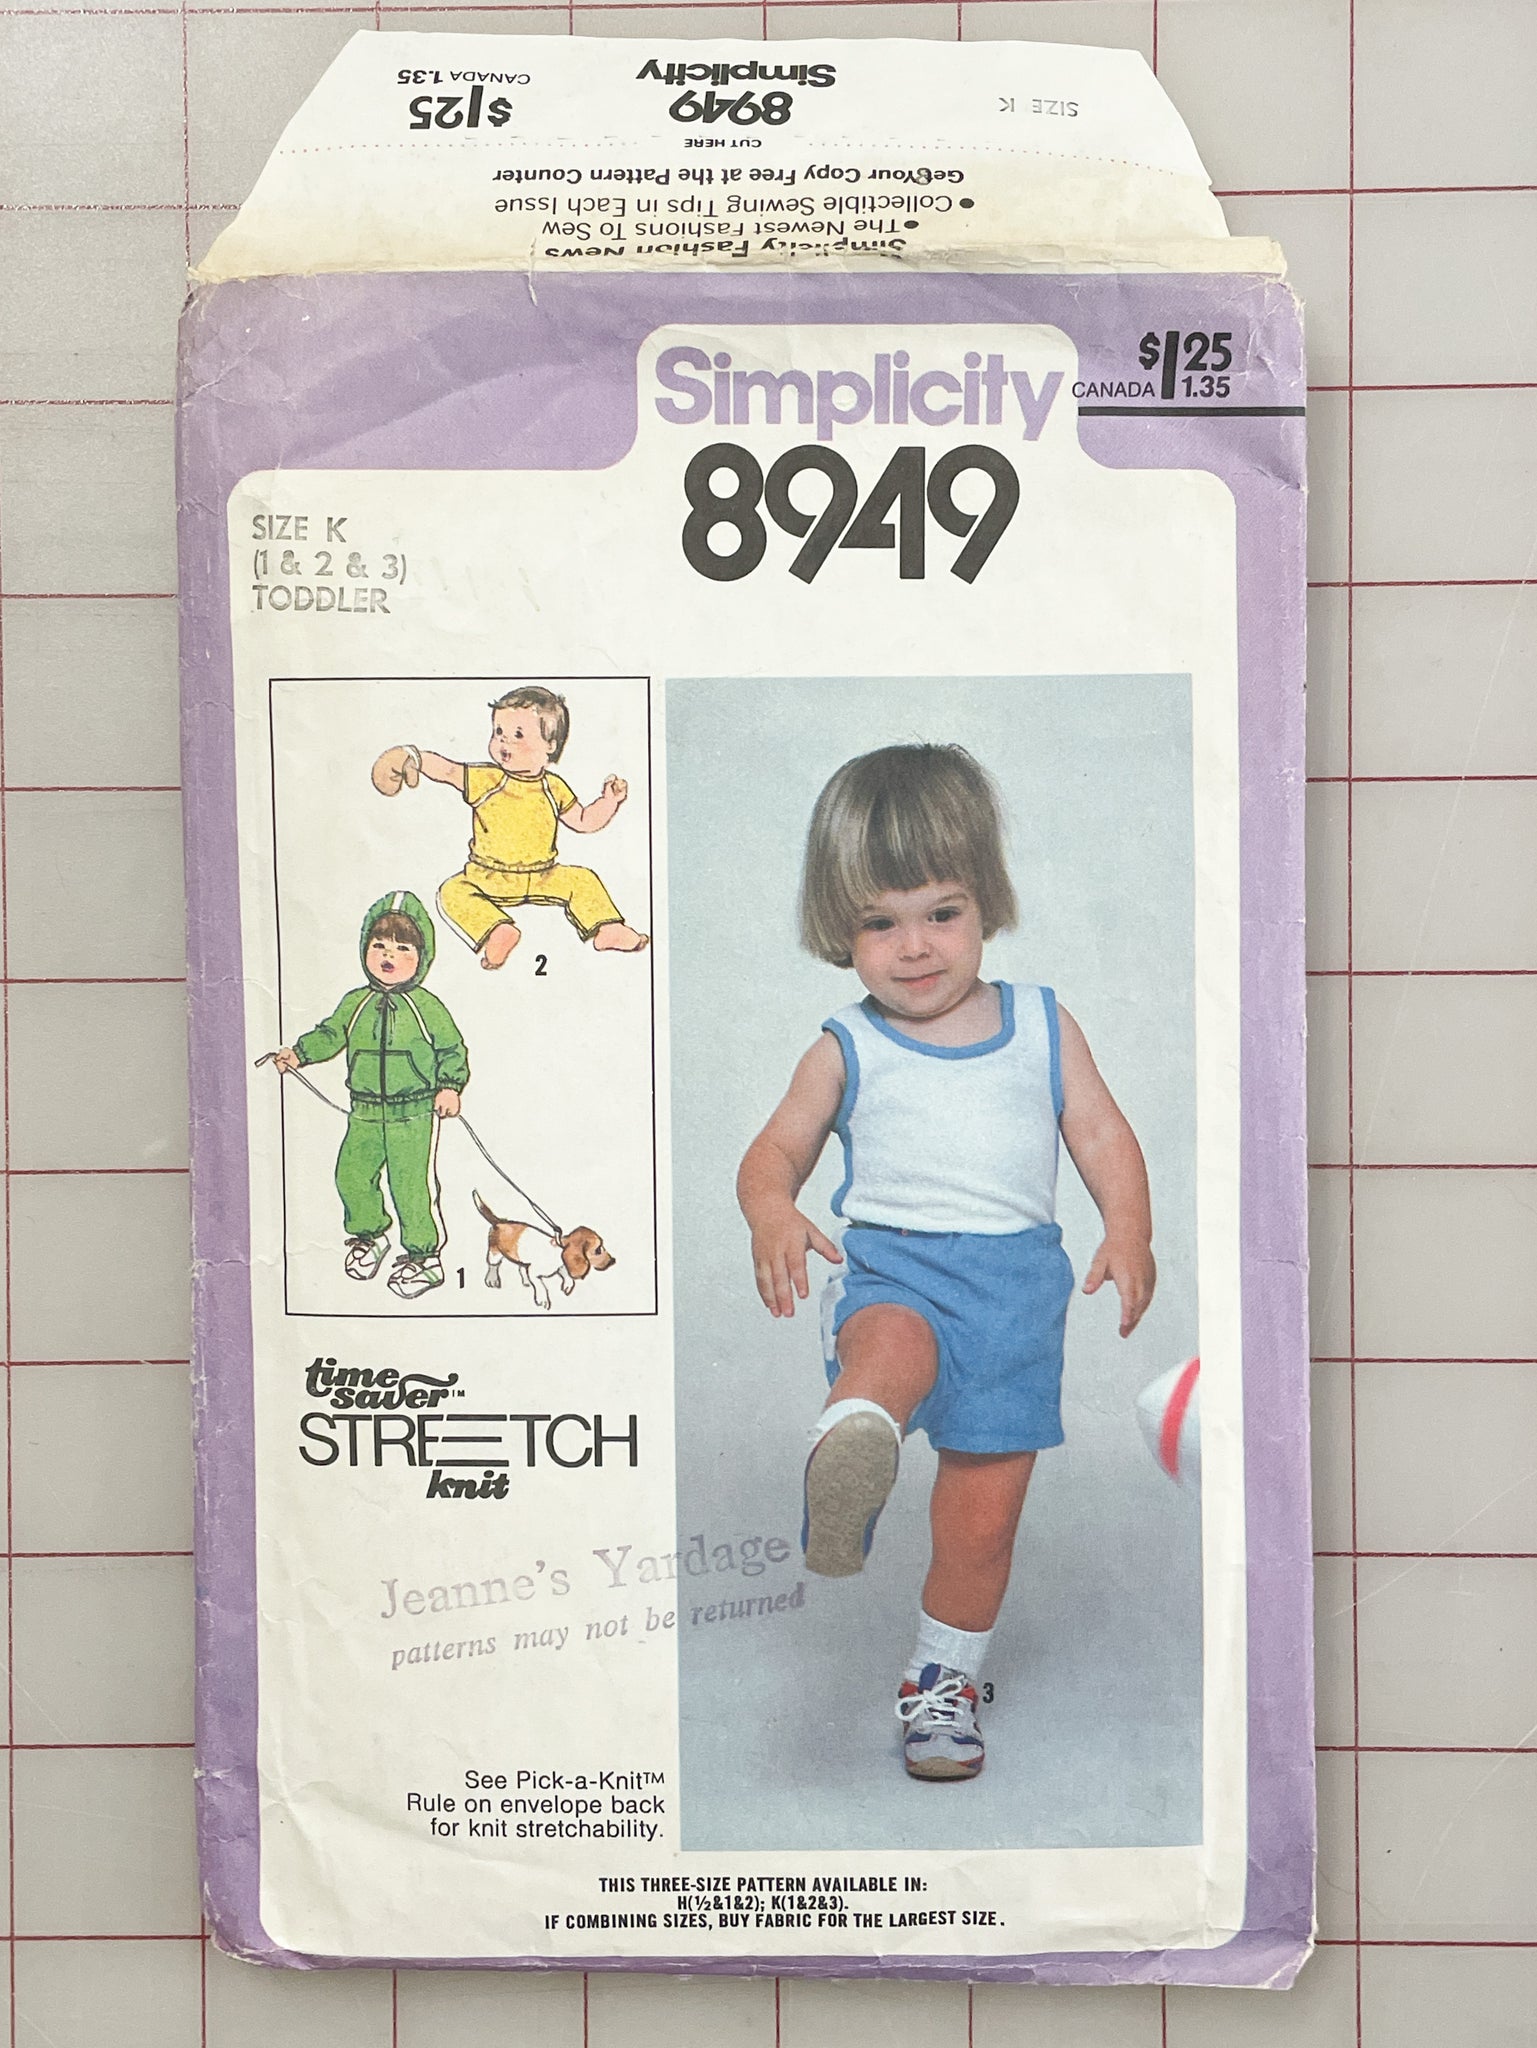 SALE 1979 Simplicity 8949 Pattern - Toddler's Knit Top, Sweatshirt, Shorts and Pants